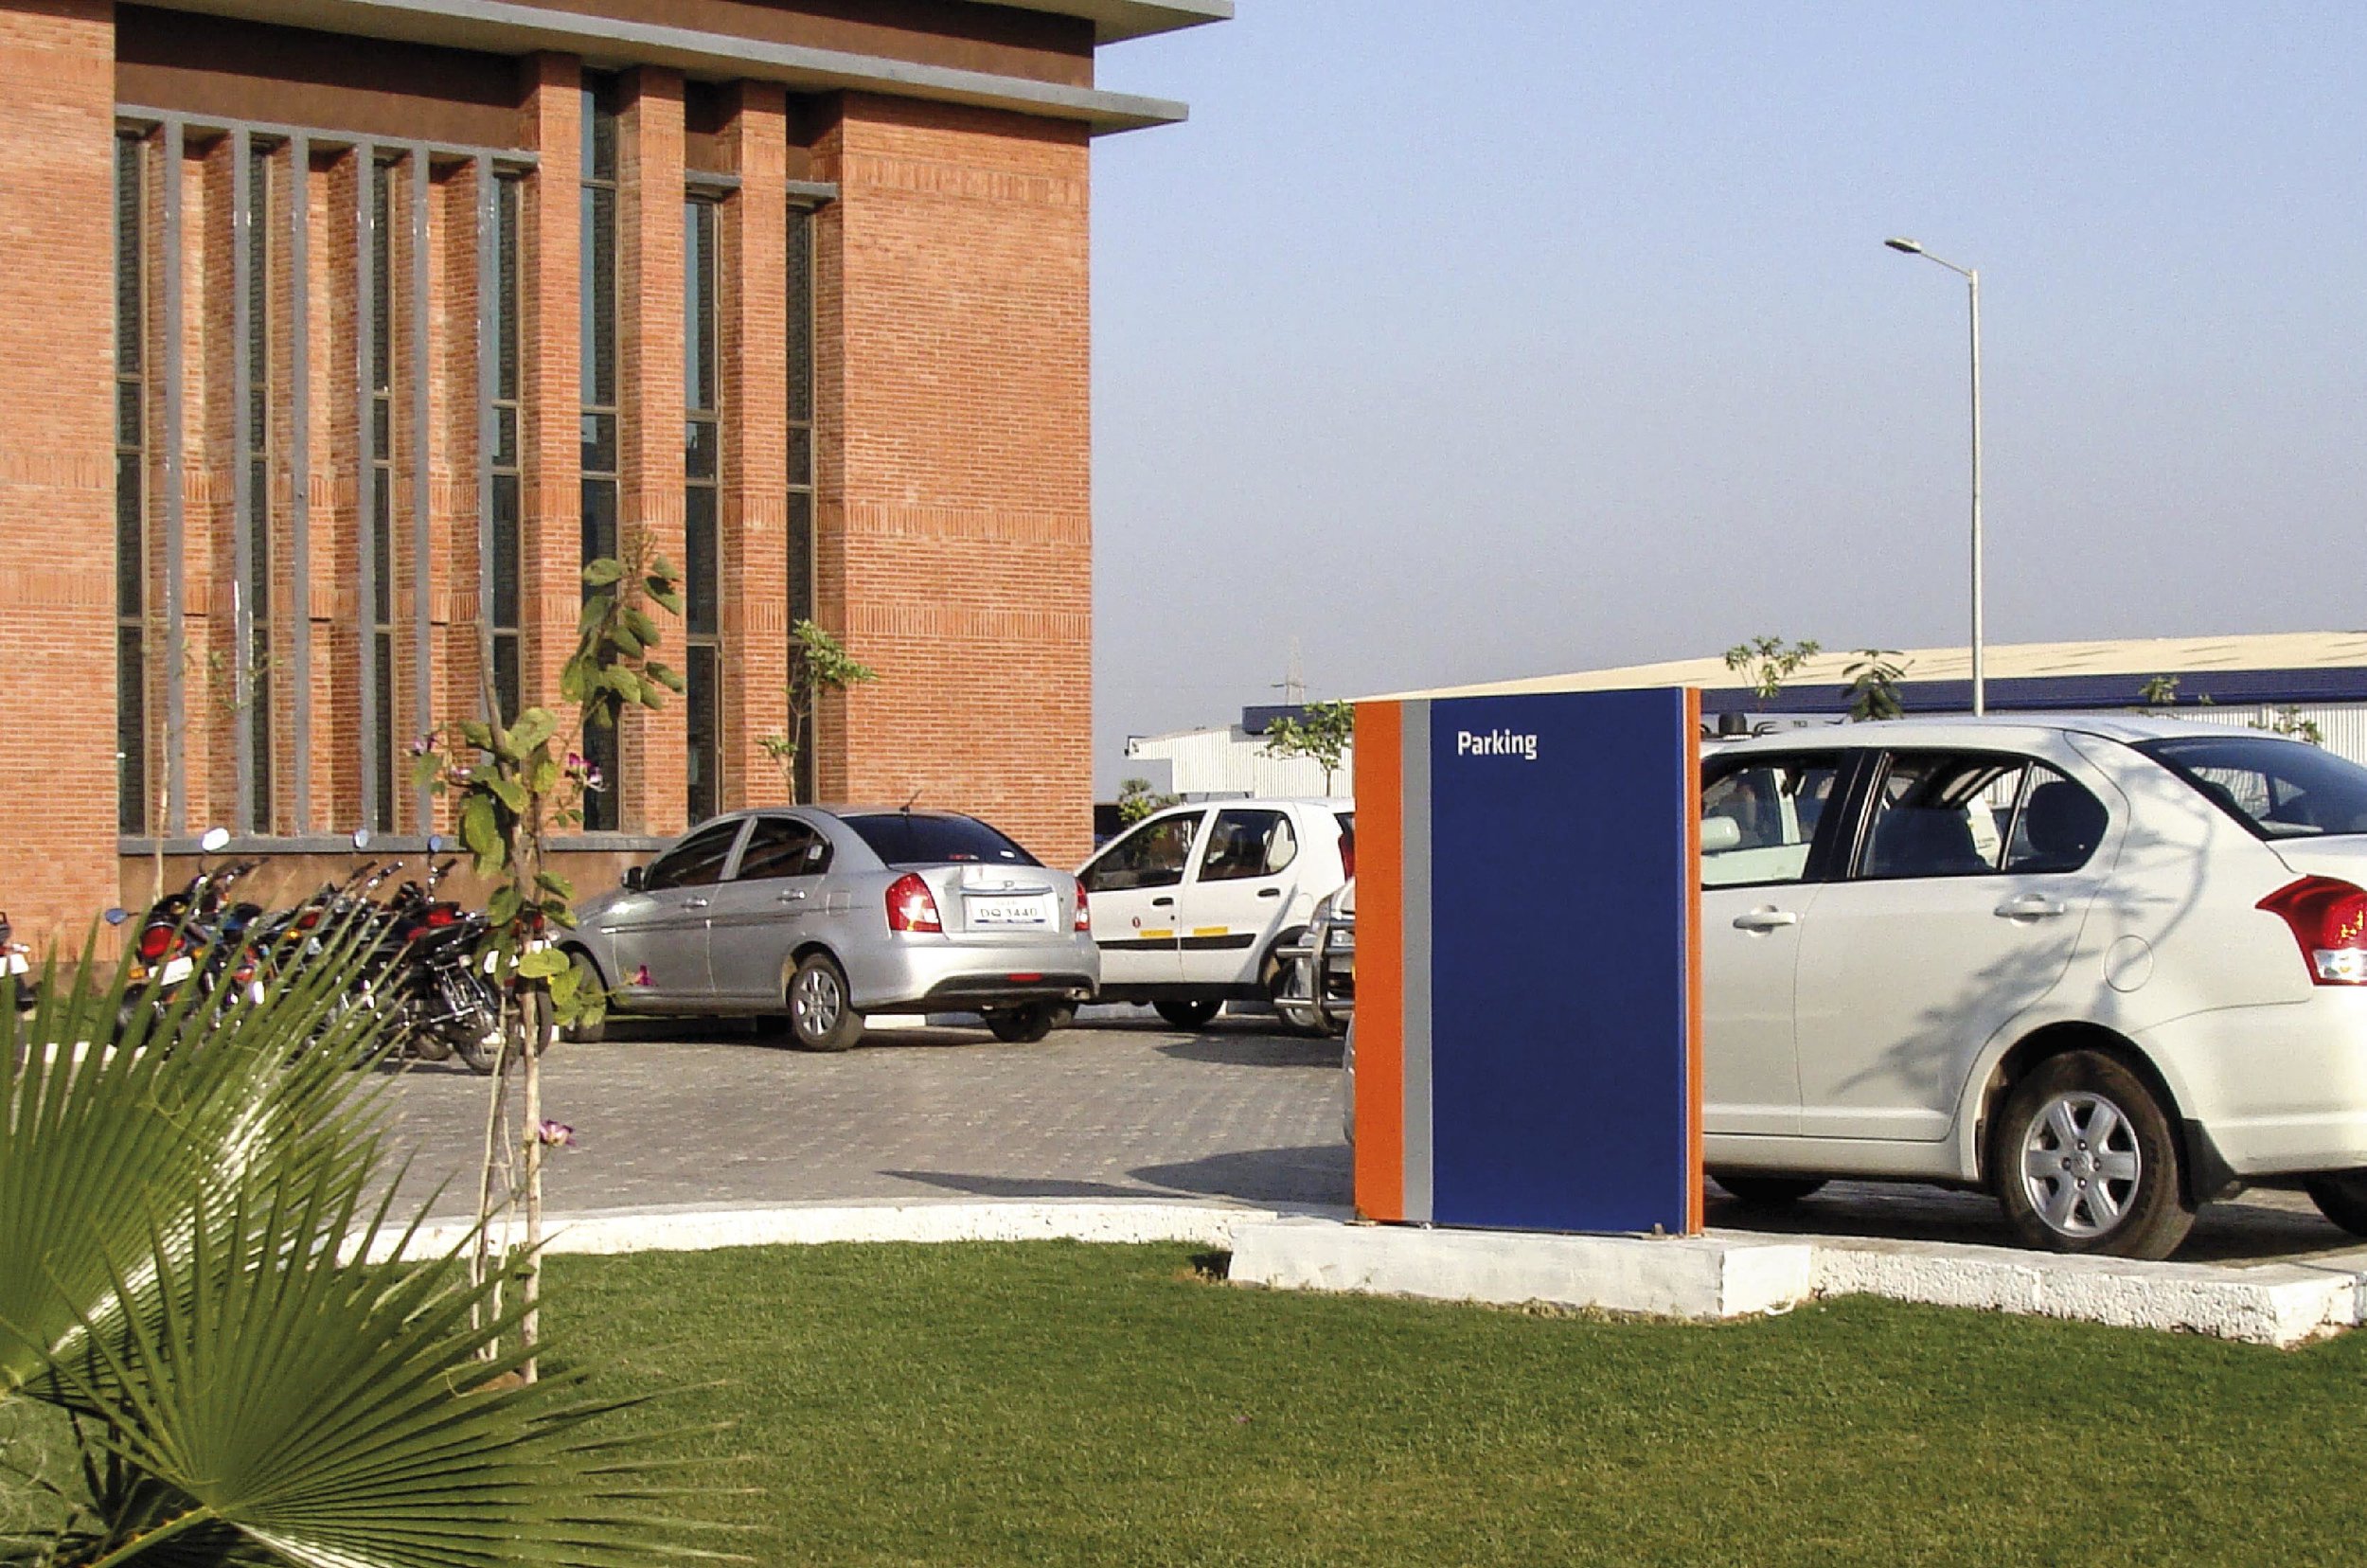 CEAT factory Signages_Branded Spaces_Elephant Design_3.jpg